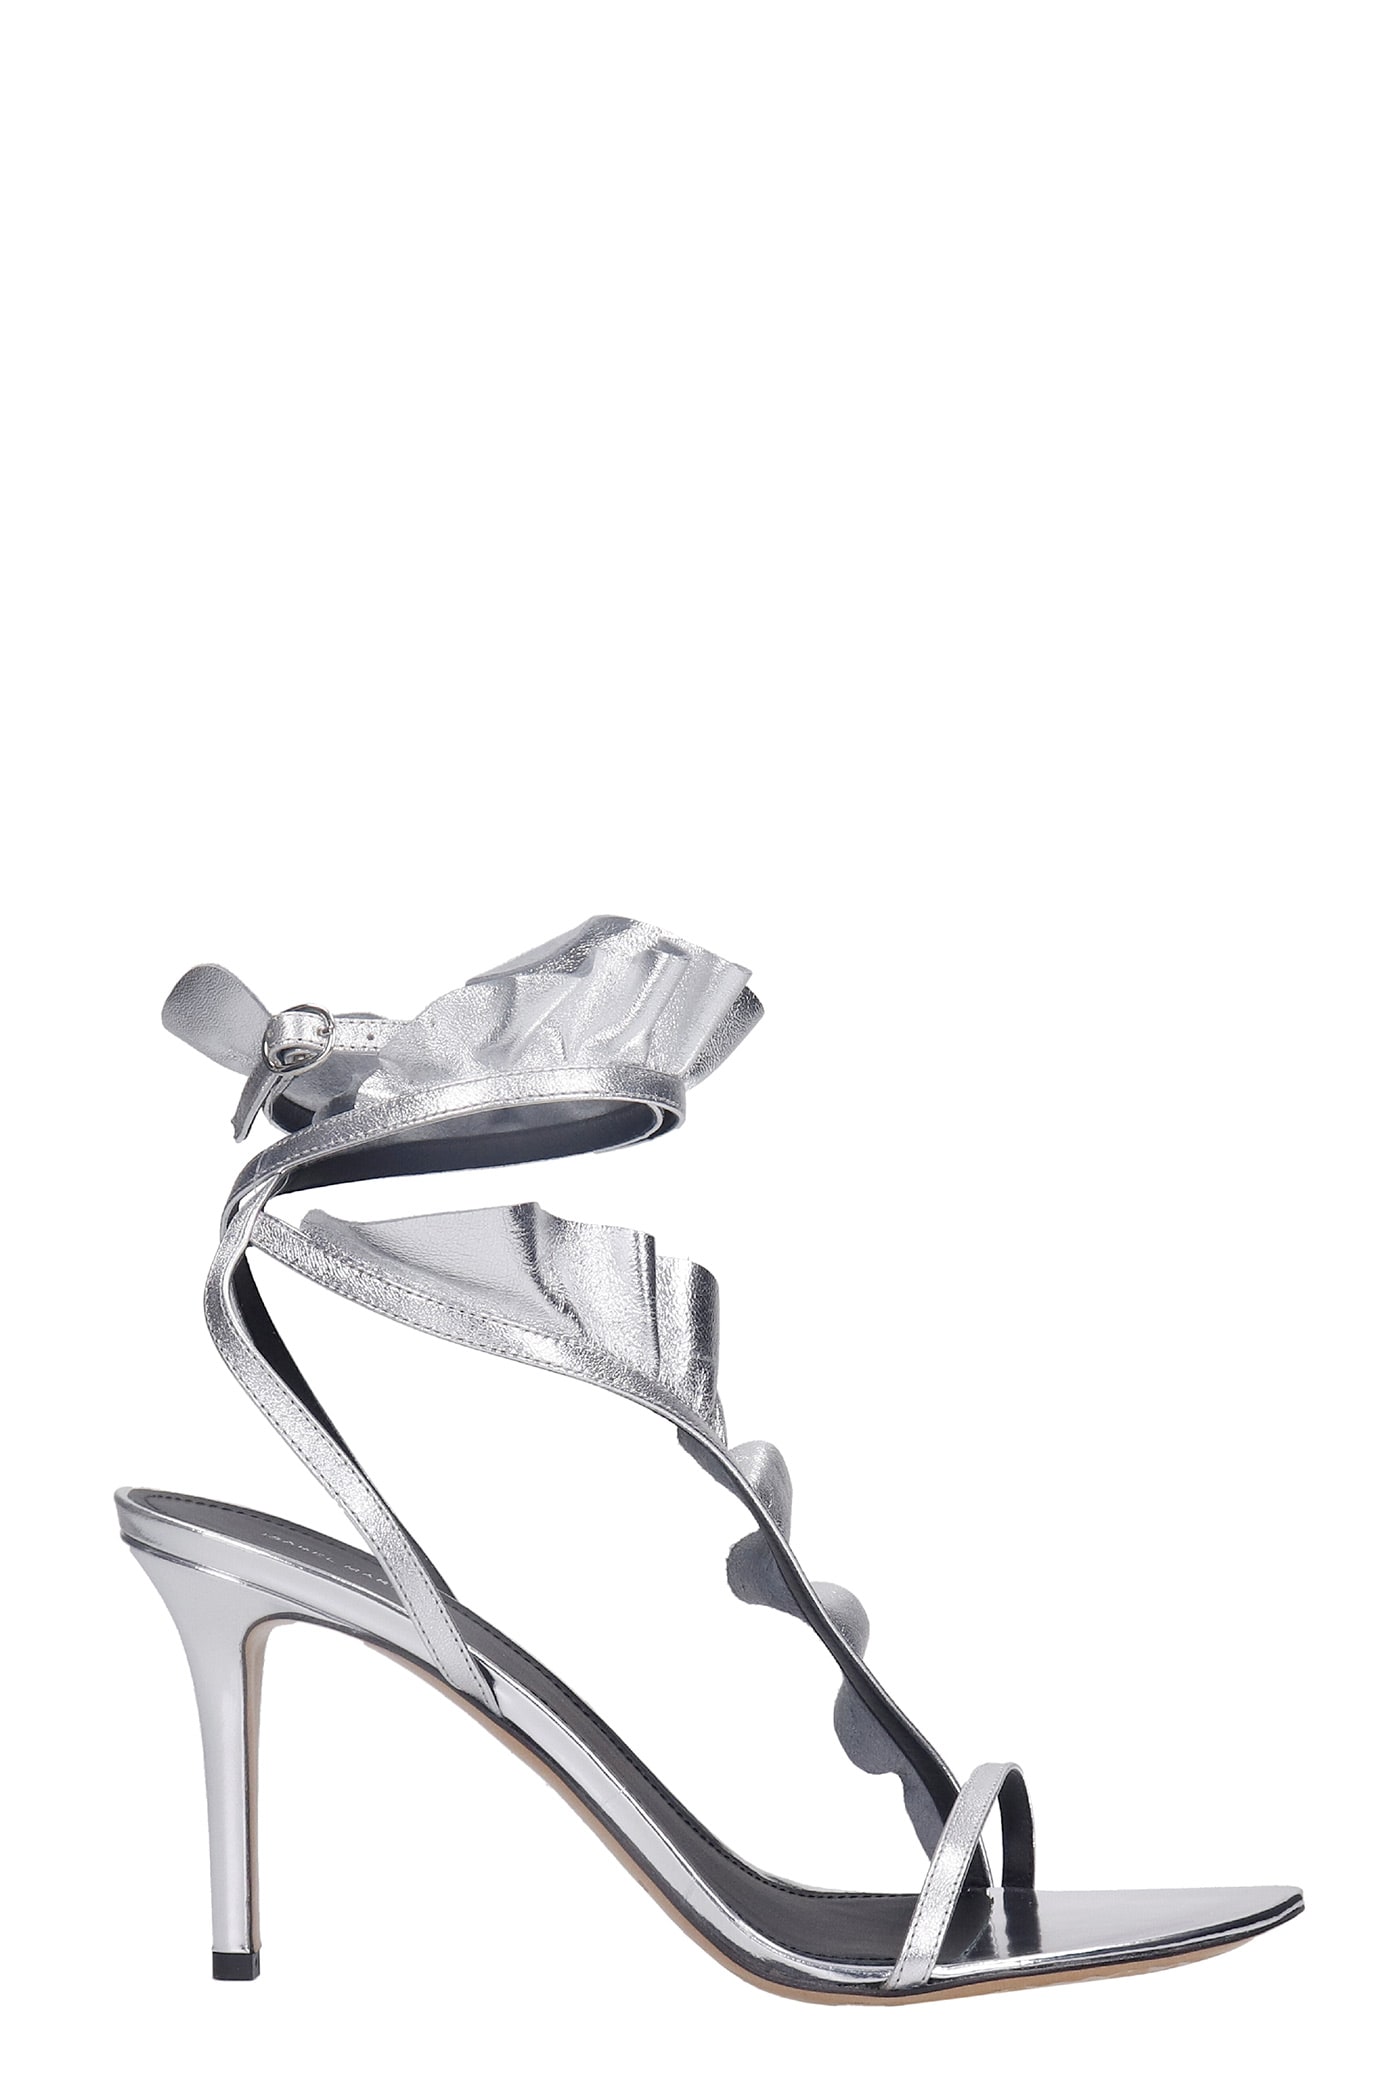 Buy Isabel Marant Alime Sandals In Silver Leather online, shop Isabel Marant shoes with free shipping